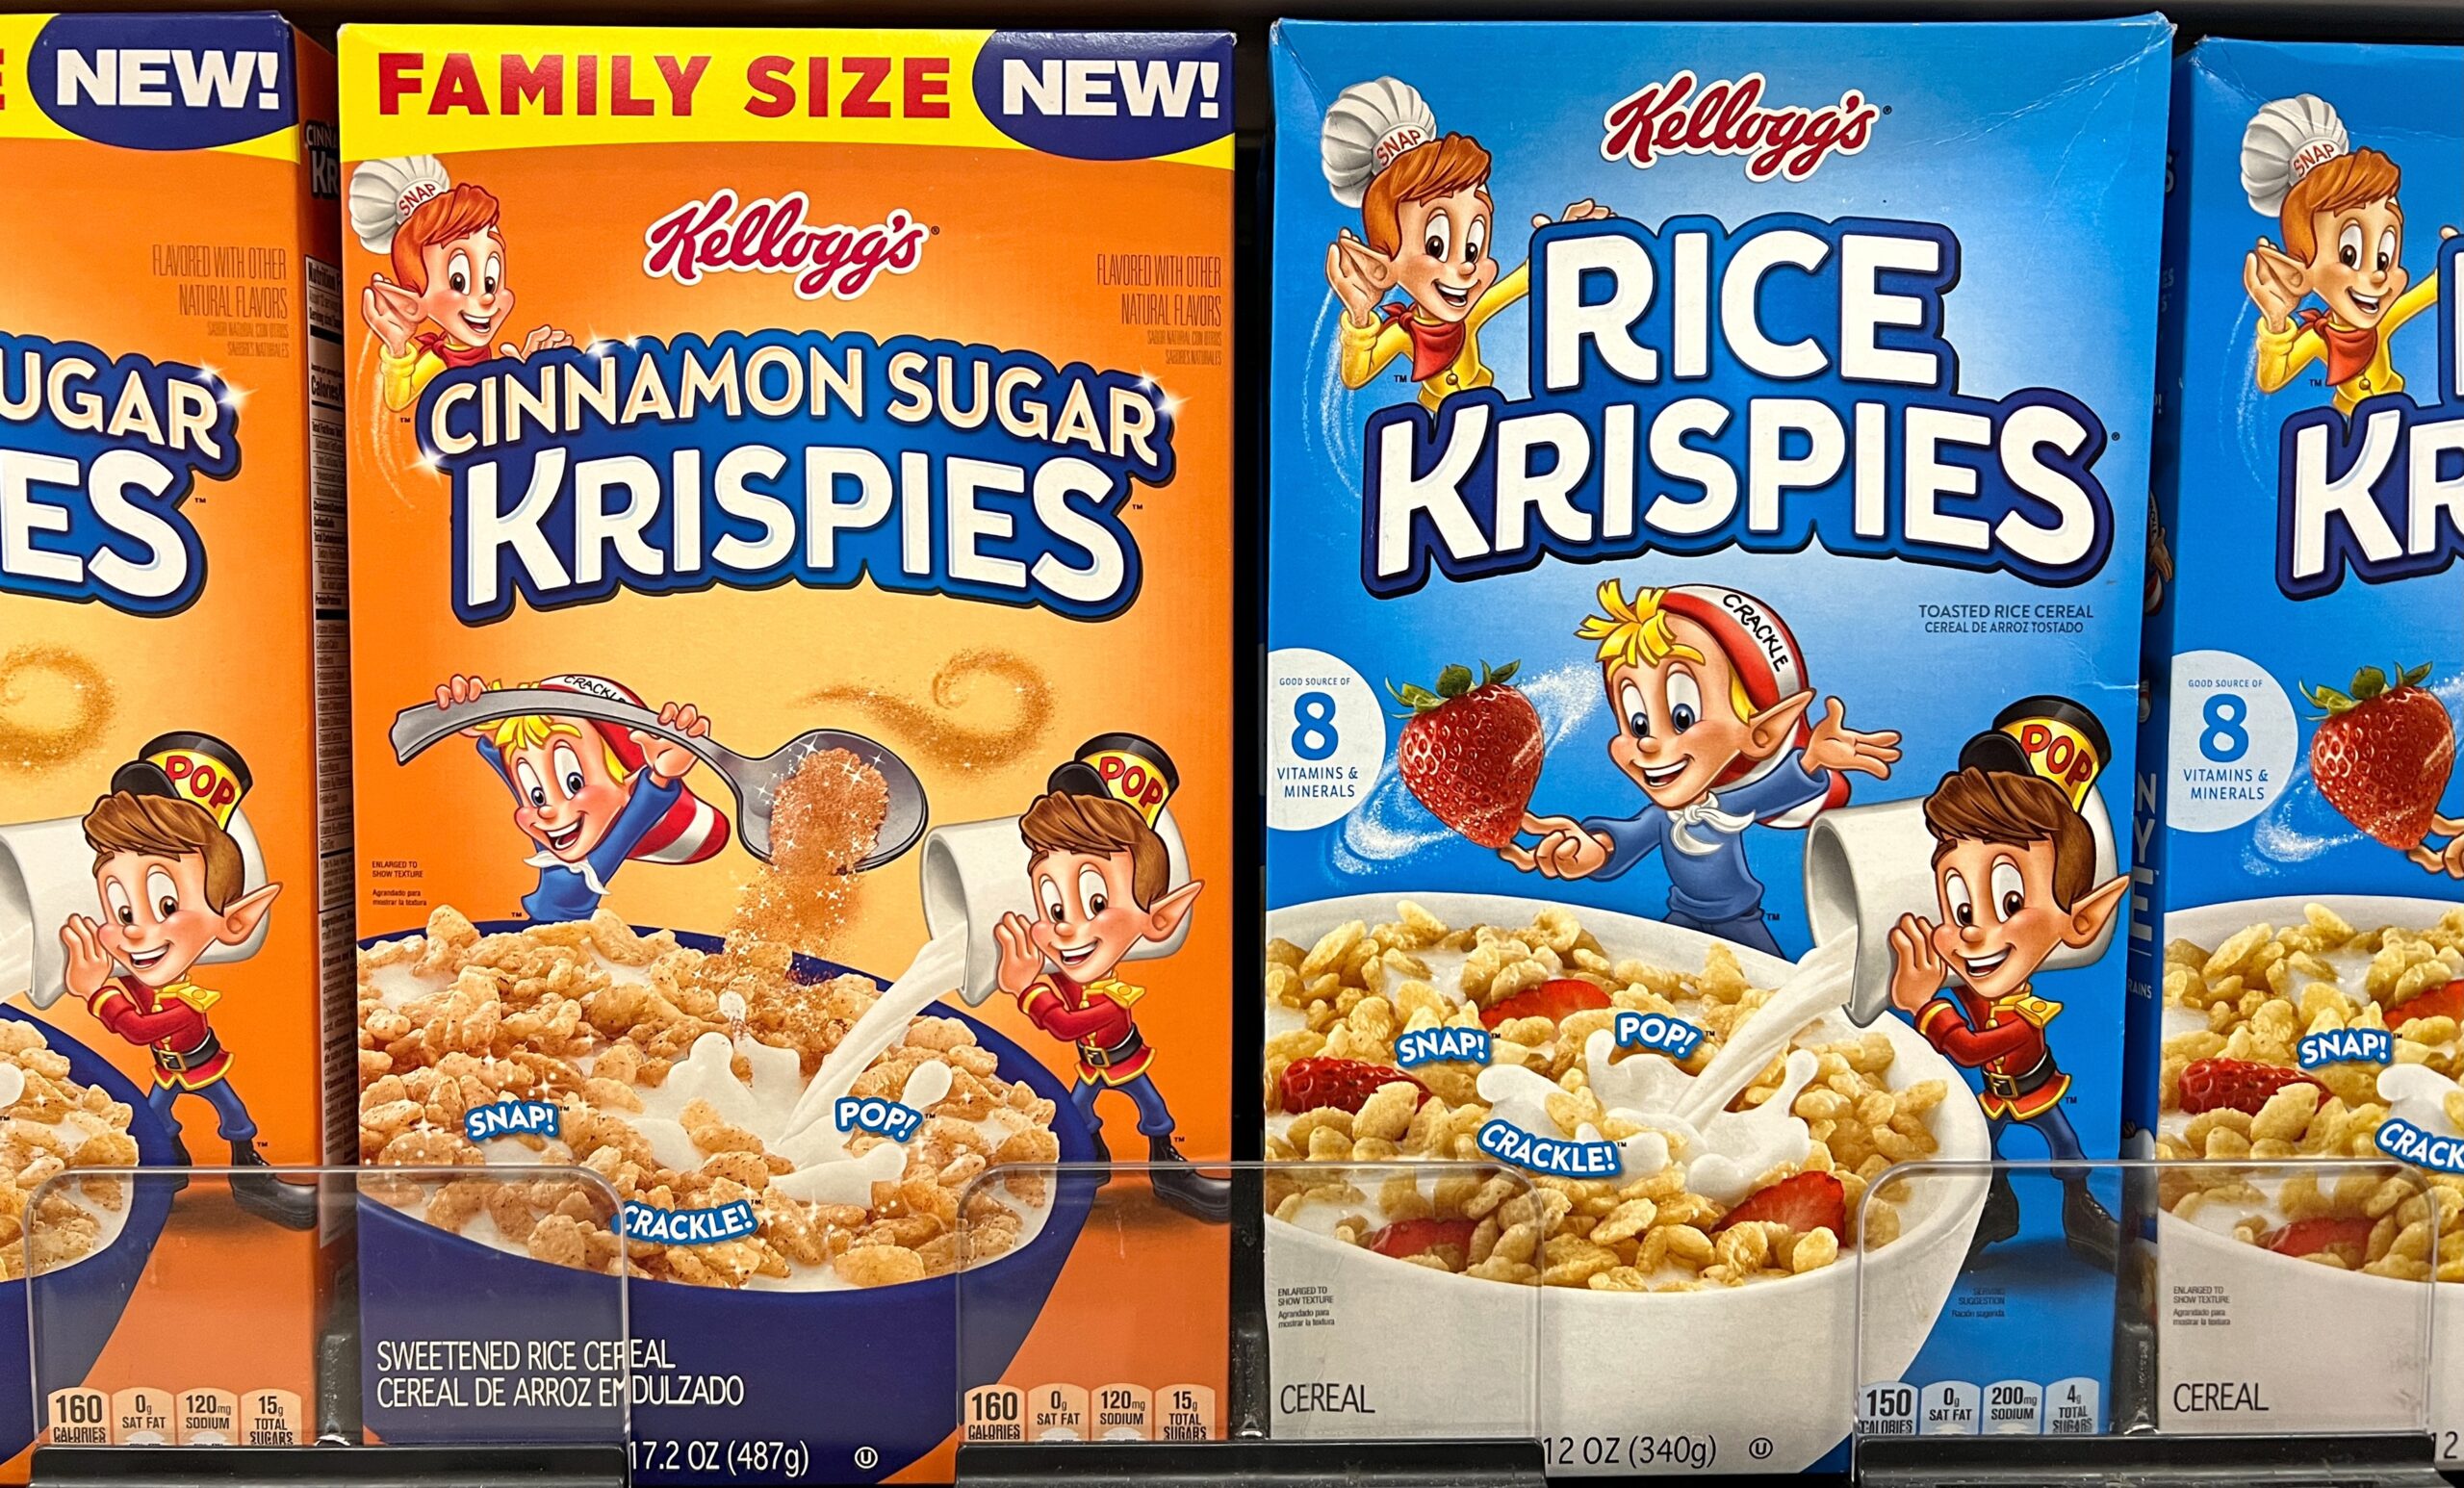 A photo of two types of Rice Krispies boxes. On the left, there's Cinnamon Sugar Rice Krispies, on the right classic Rice Krispies.